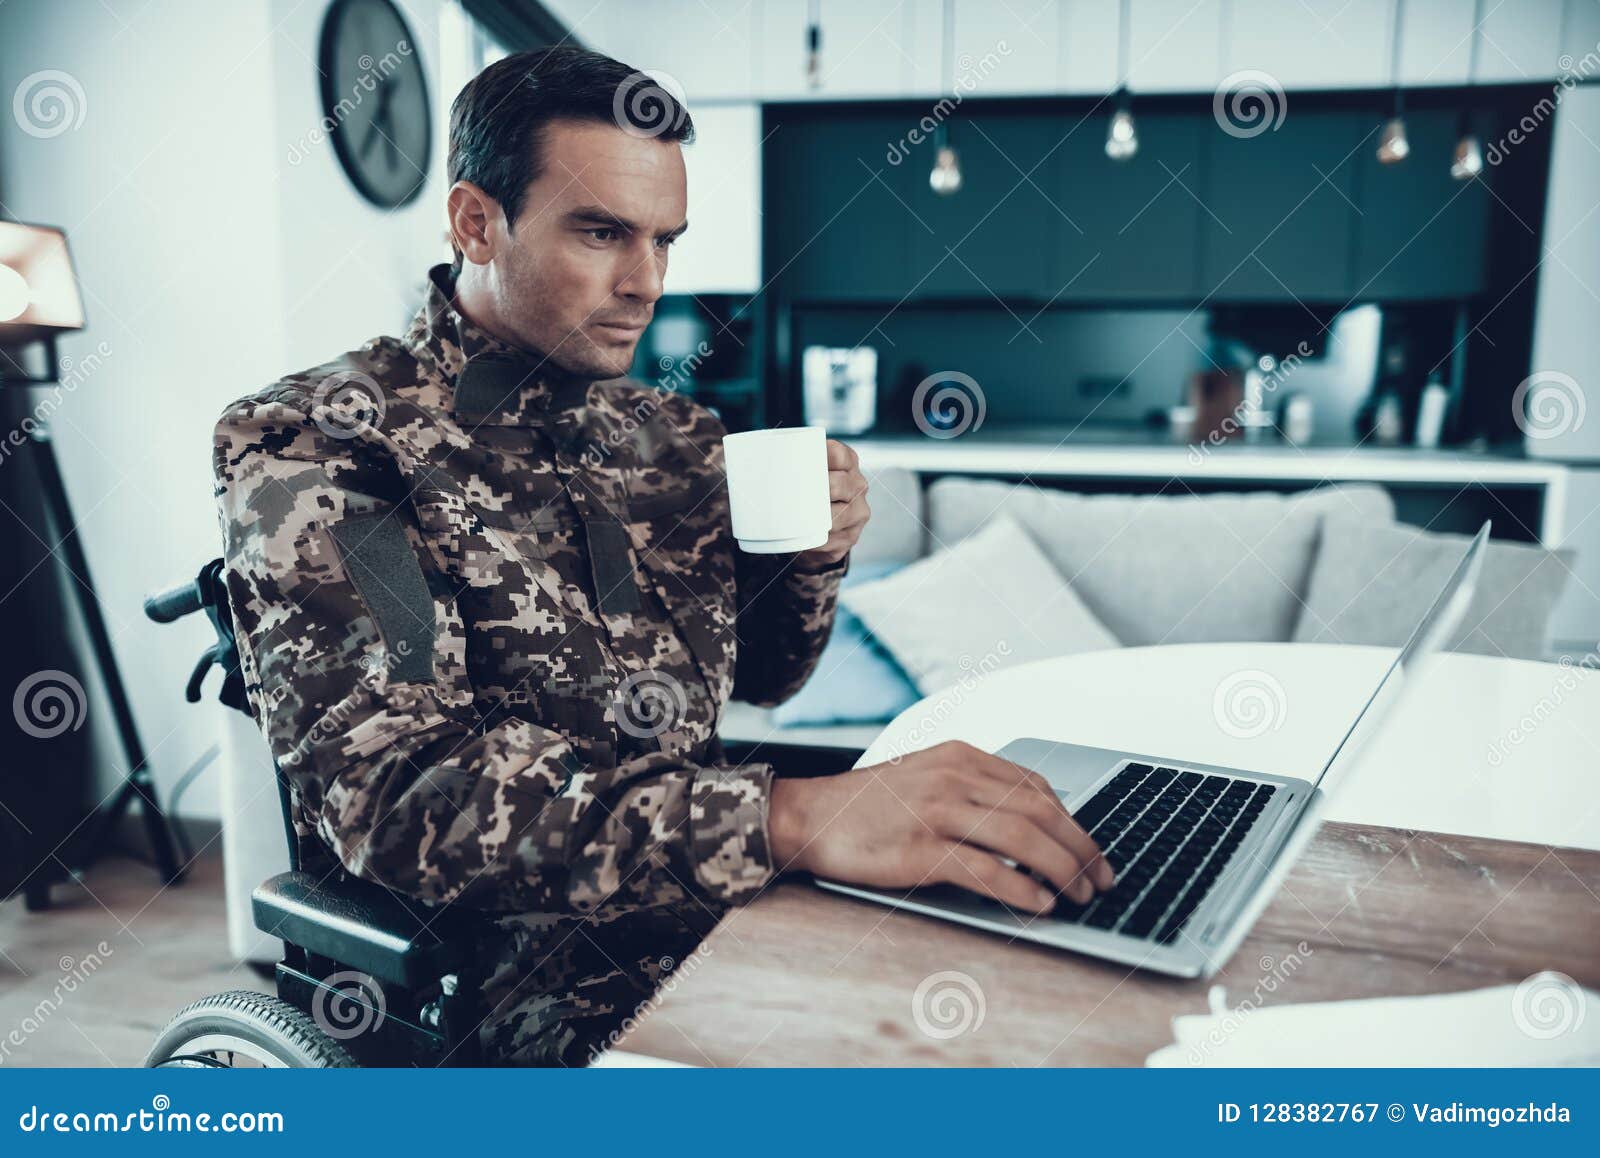 Military In Wheelchair Work On Laptop And Drinks Stock Image